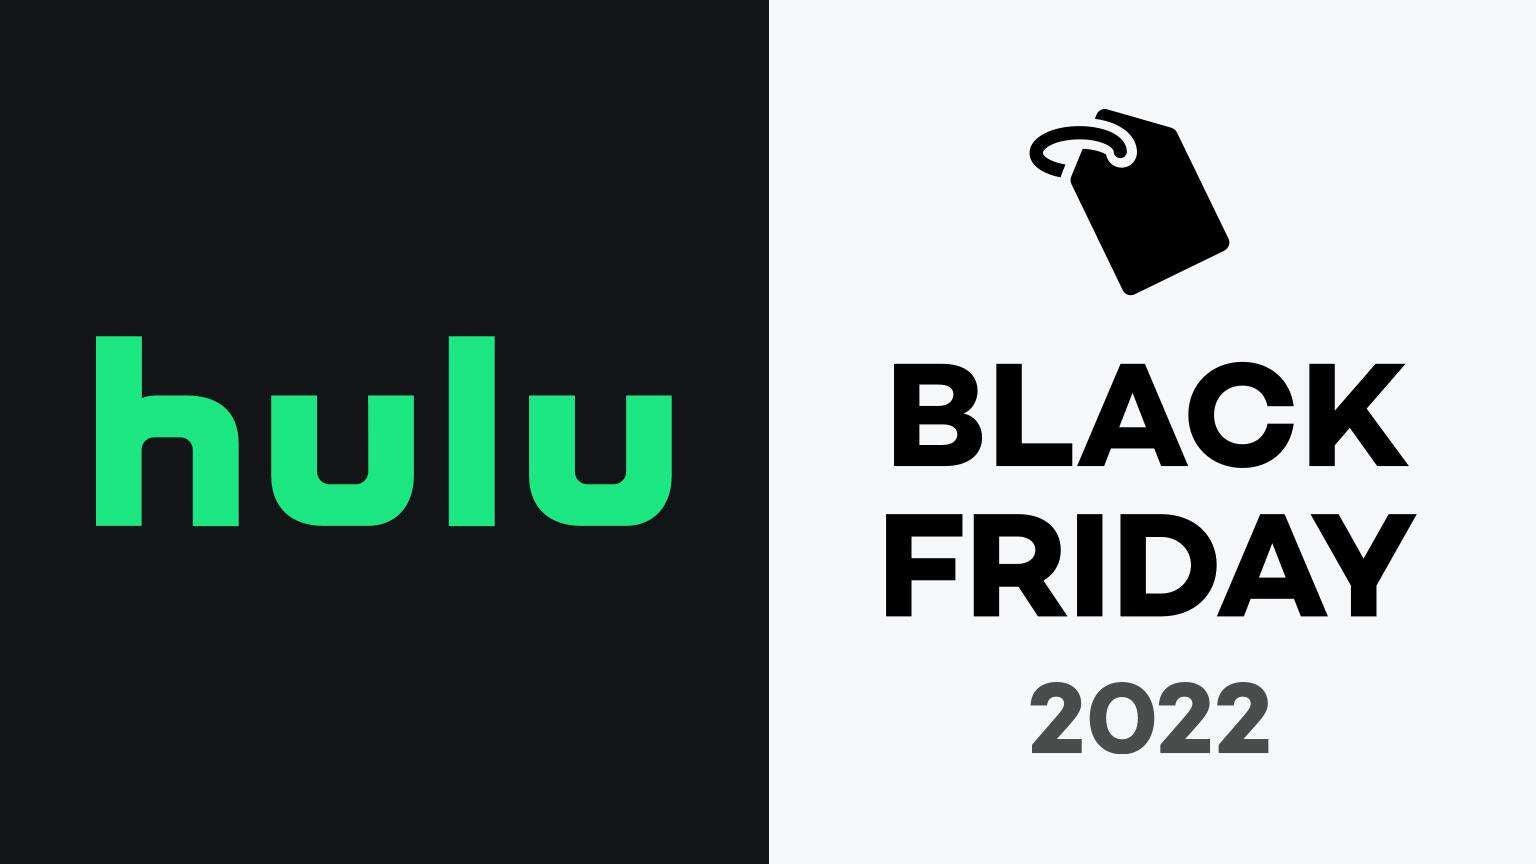 Hulu Black Friday & Cyber Monday 2022 Deals What Are The Best Promo